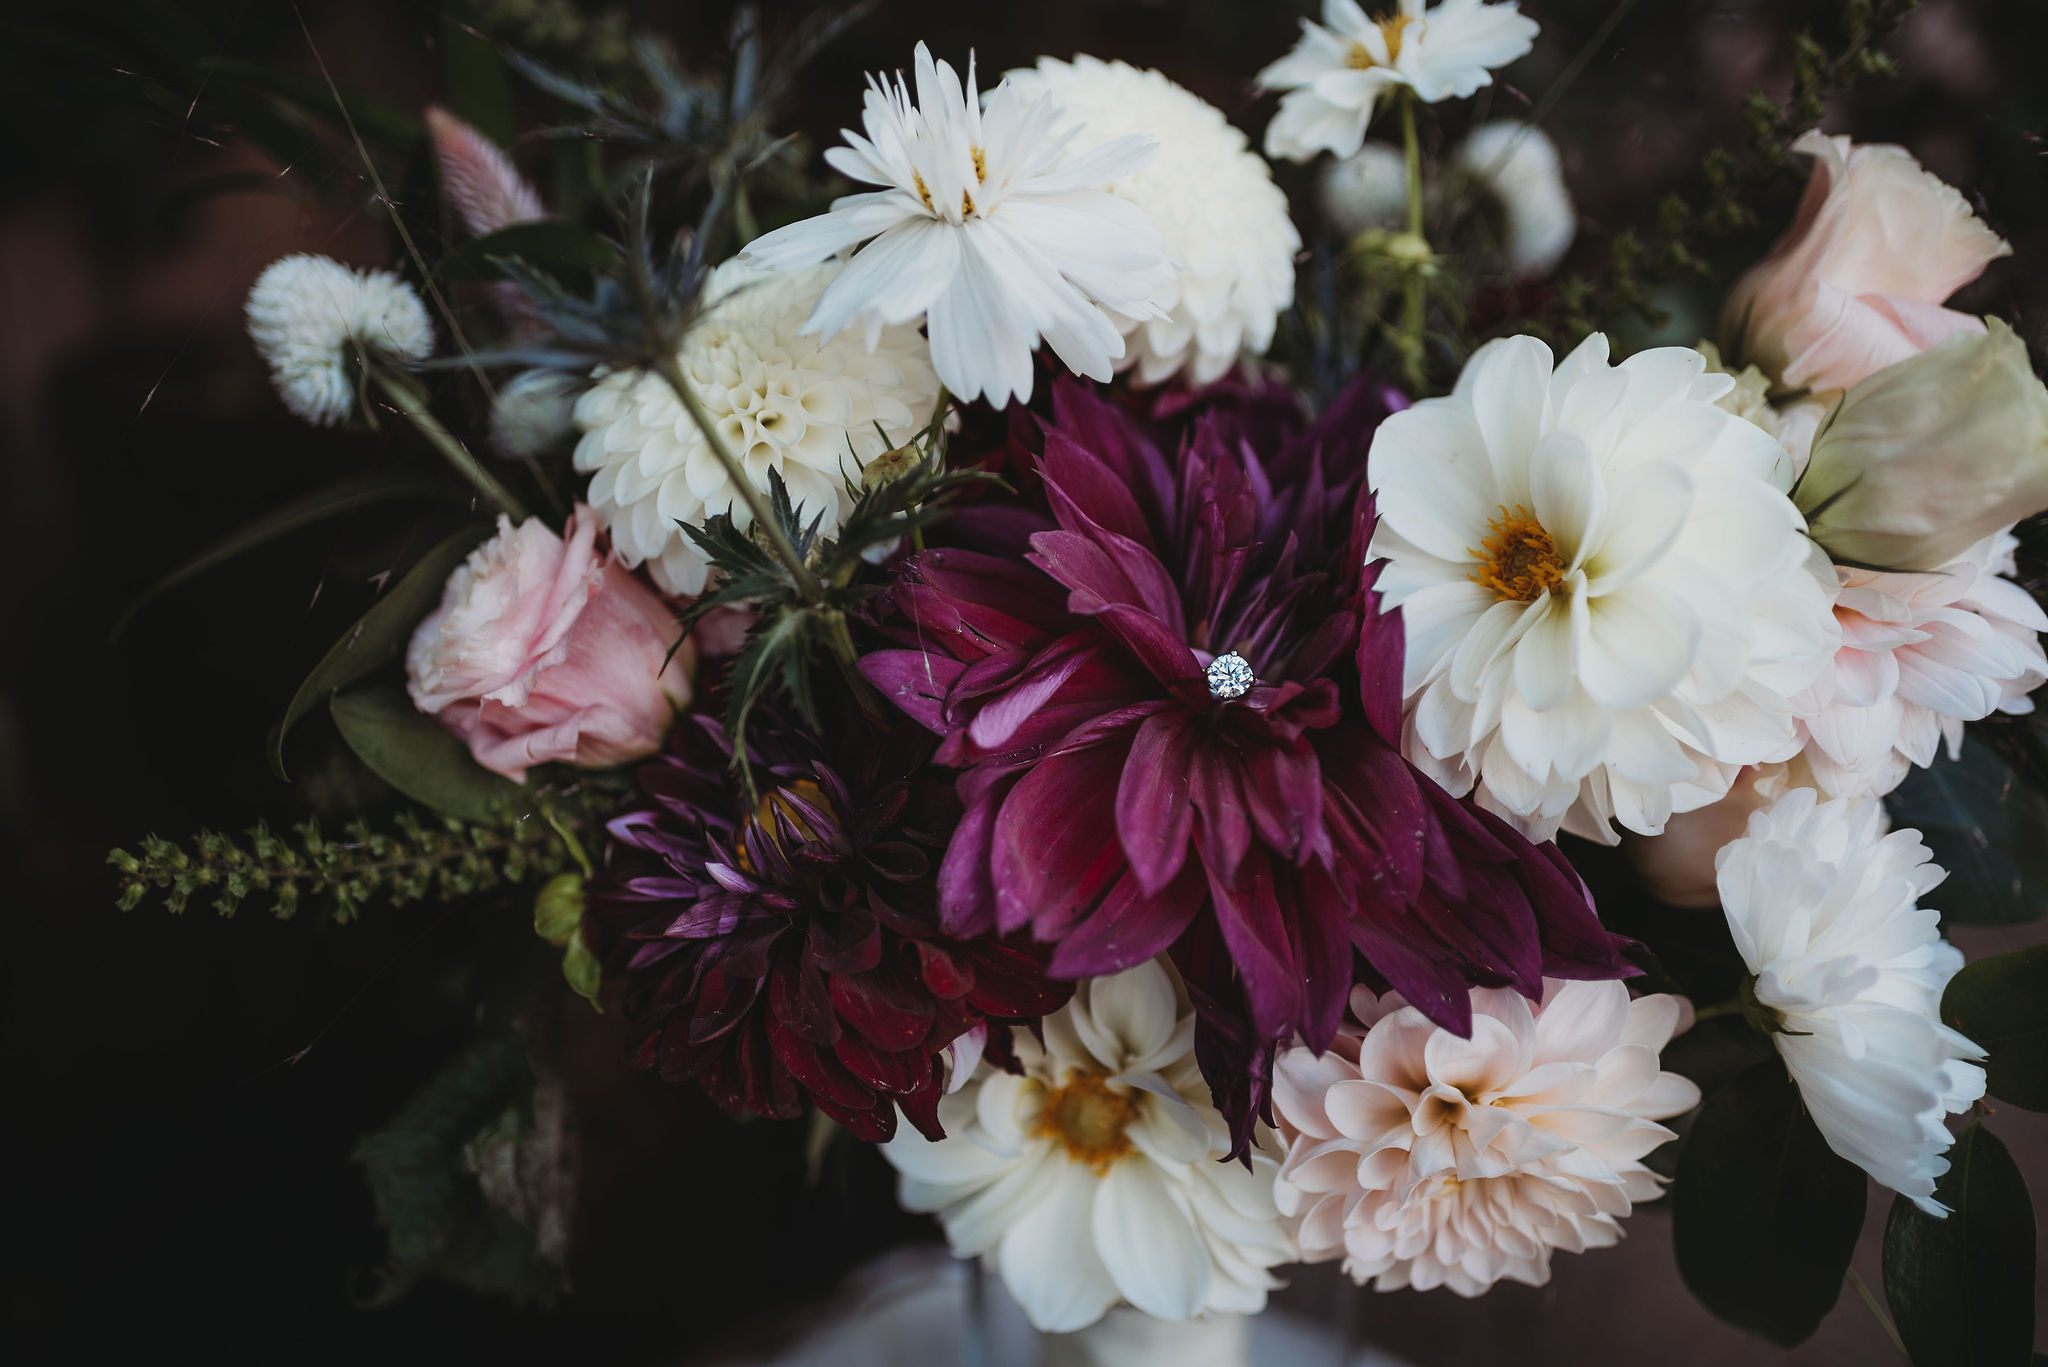 Close up on a bouquet of fall flowers, including whites, purples, and reds.